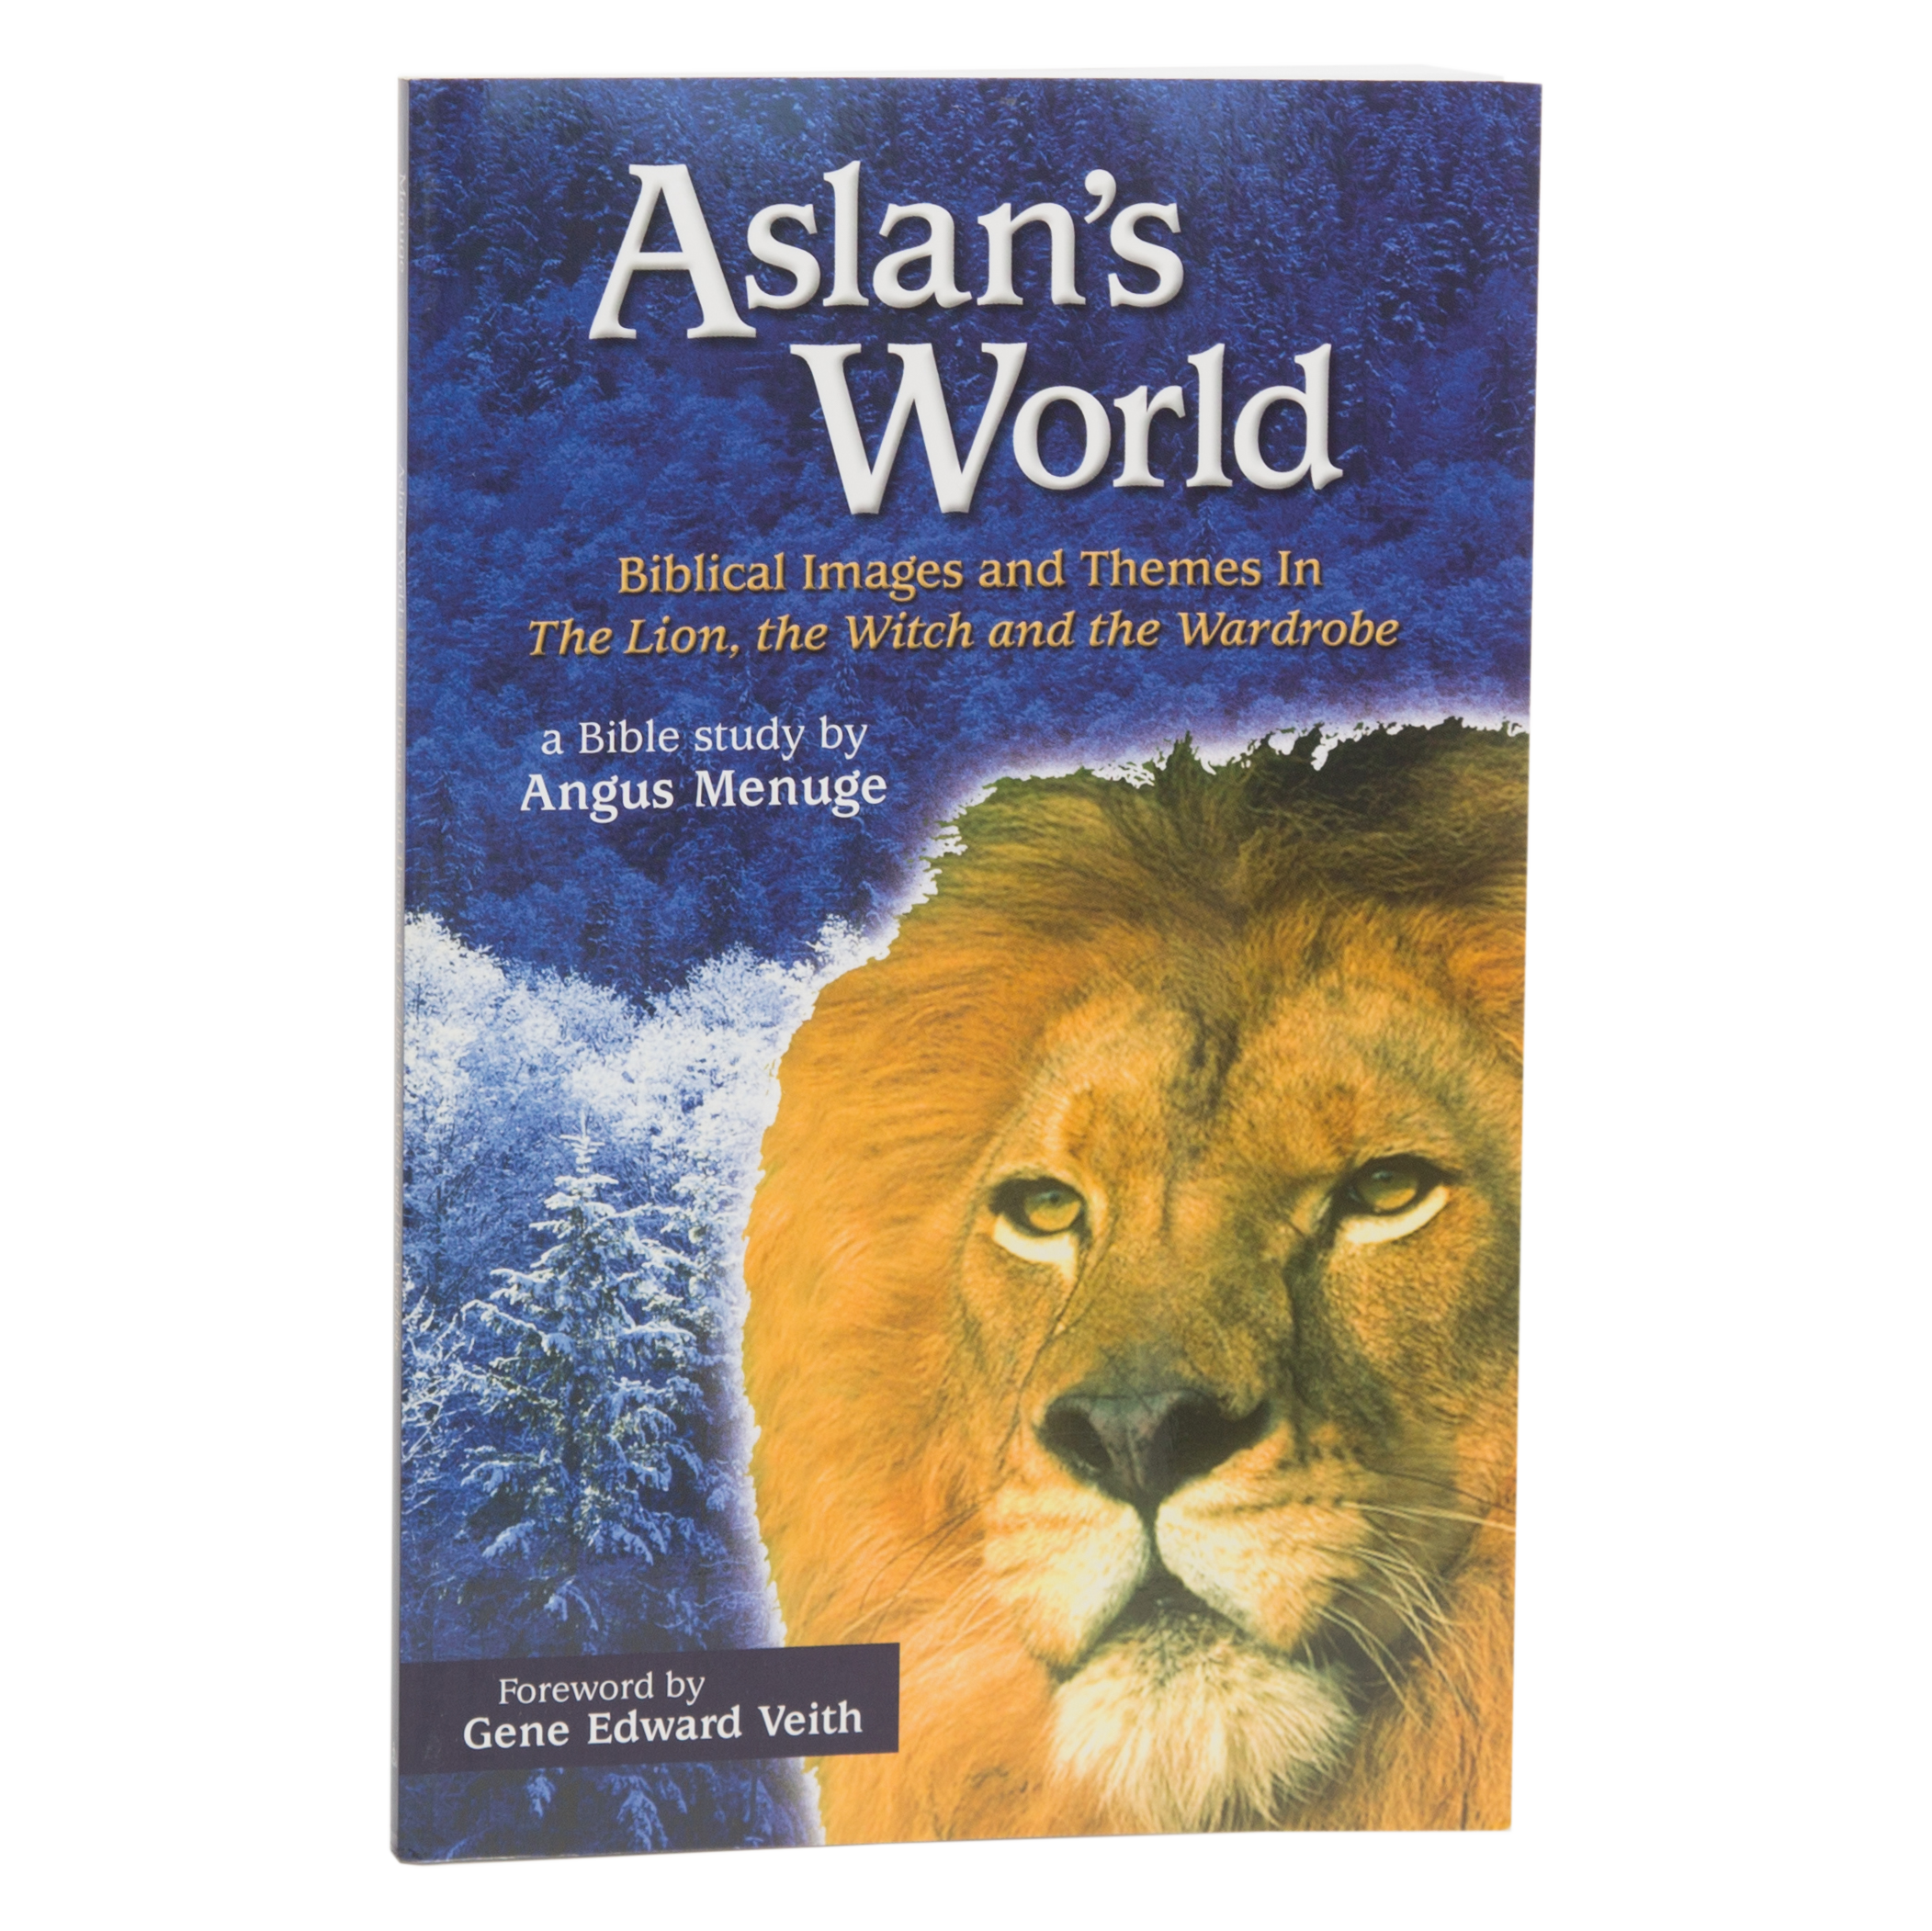 Aslan's World: Biblical Images and Themes In The Lion, the Witch and the  Wardrobe.